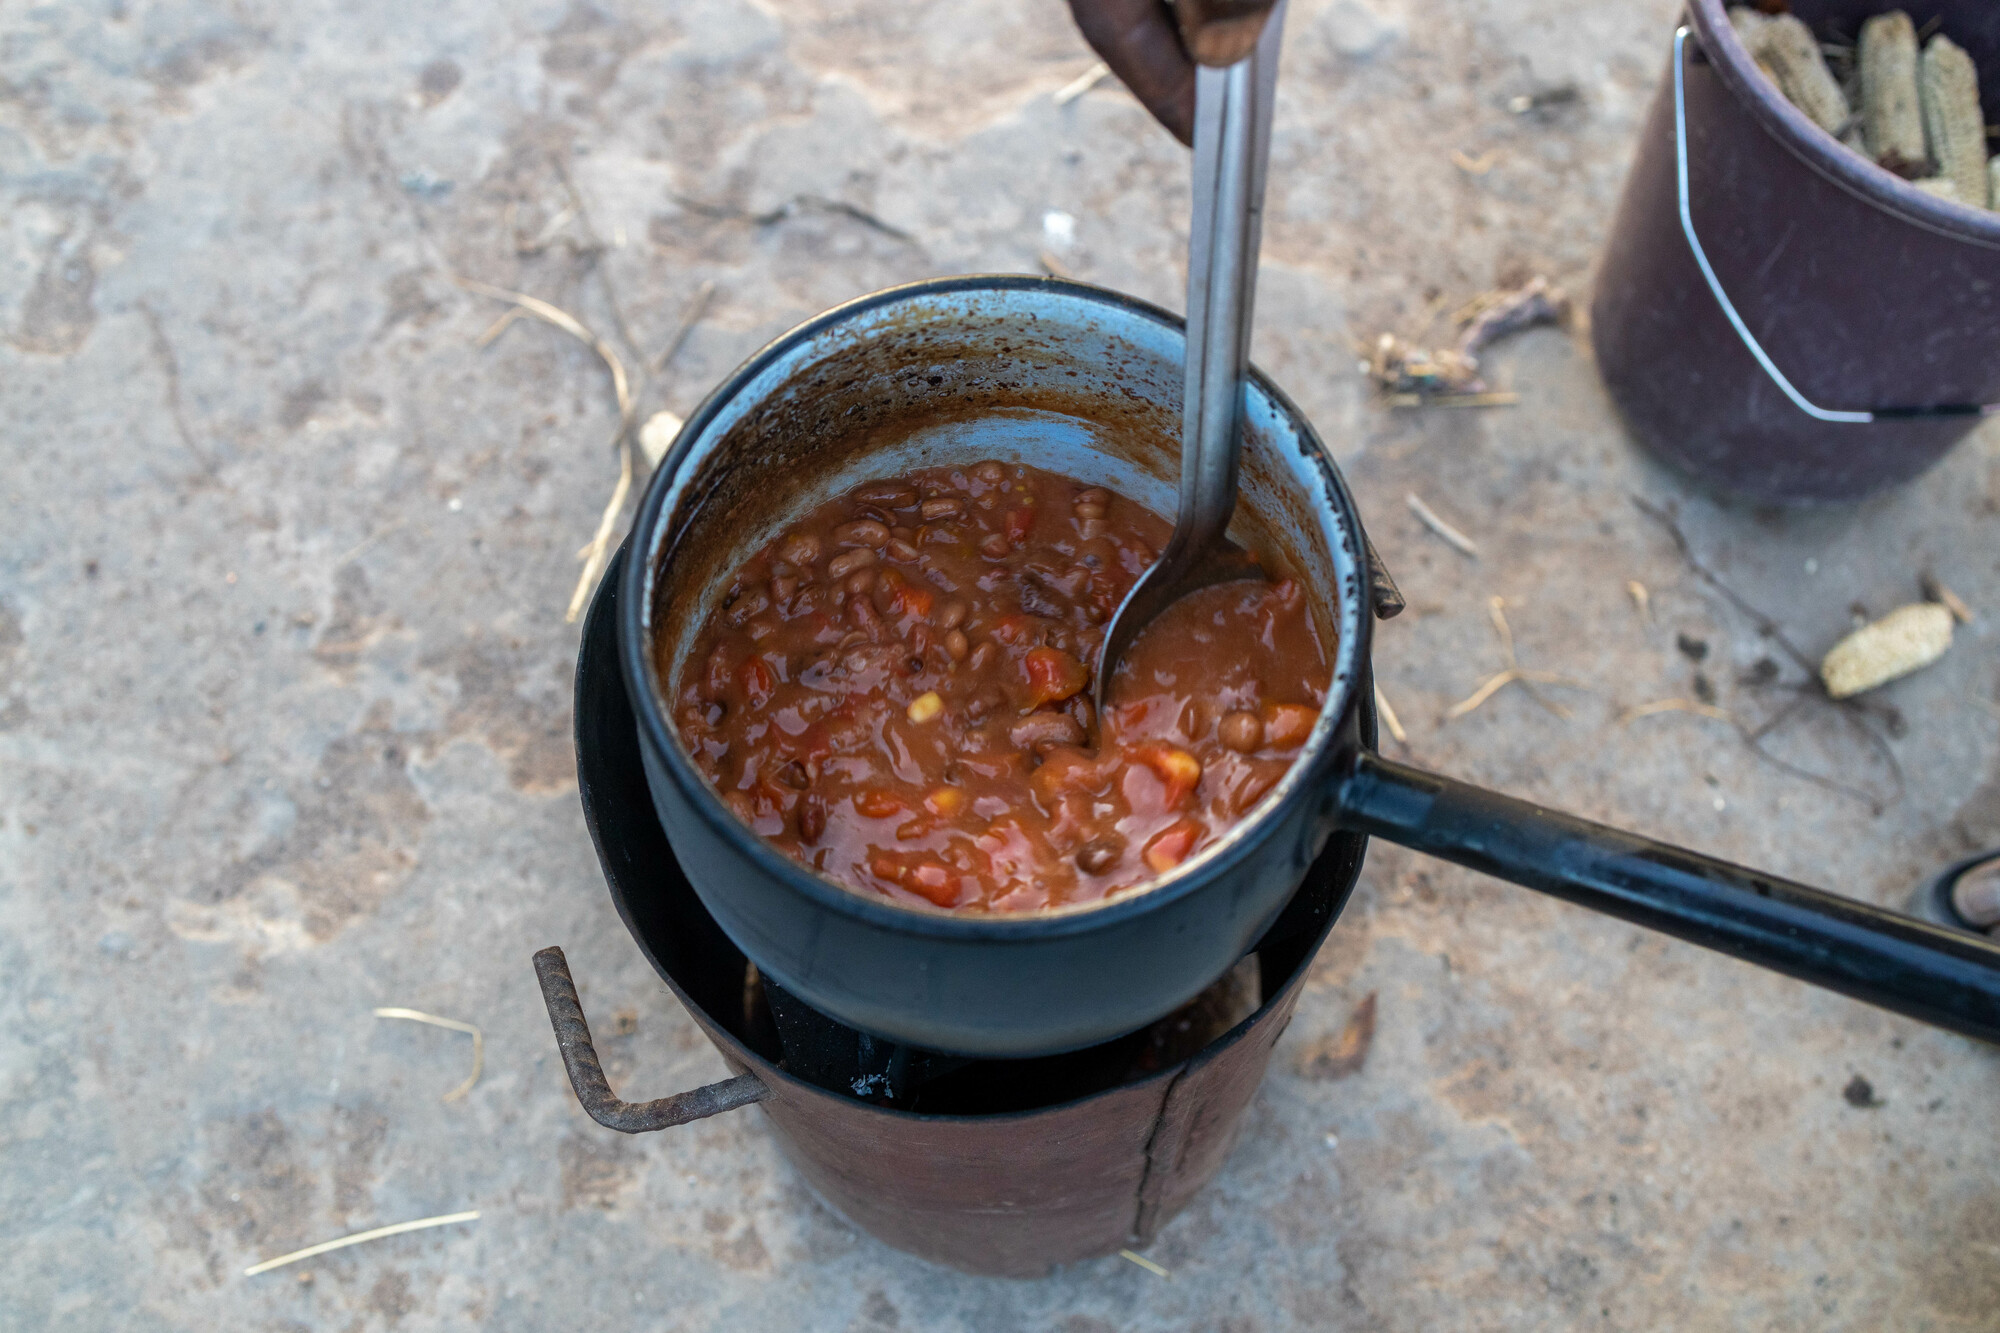 A pot of beans cooking over a small outdoor stove